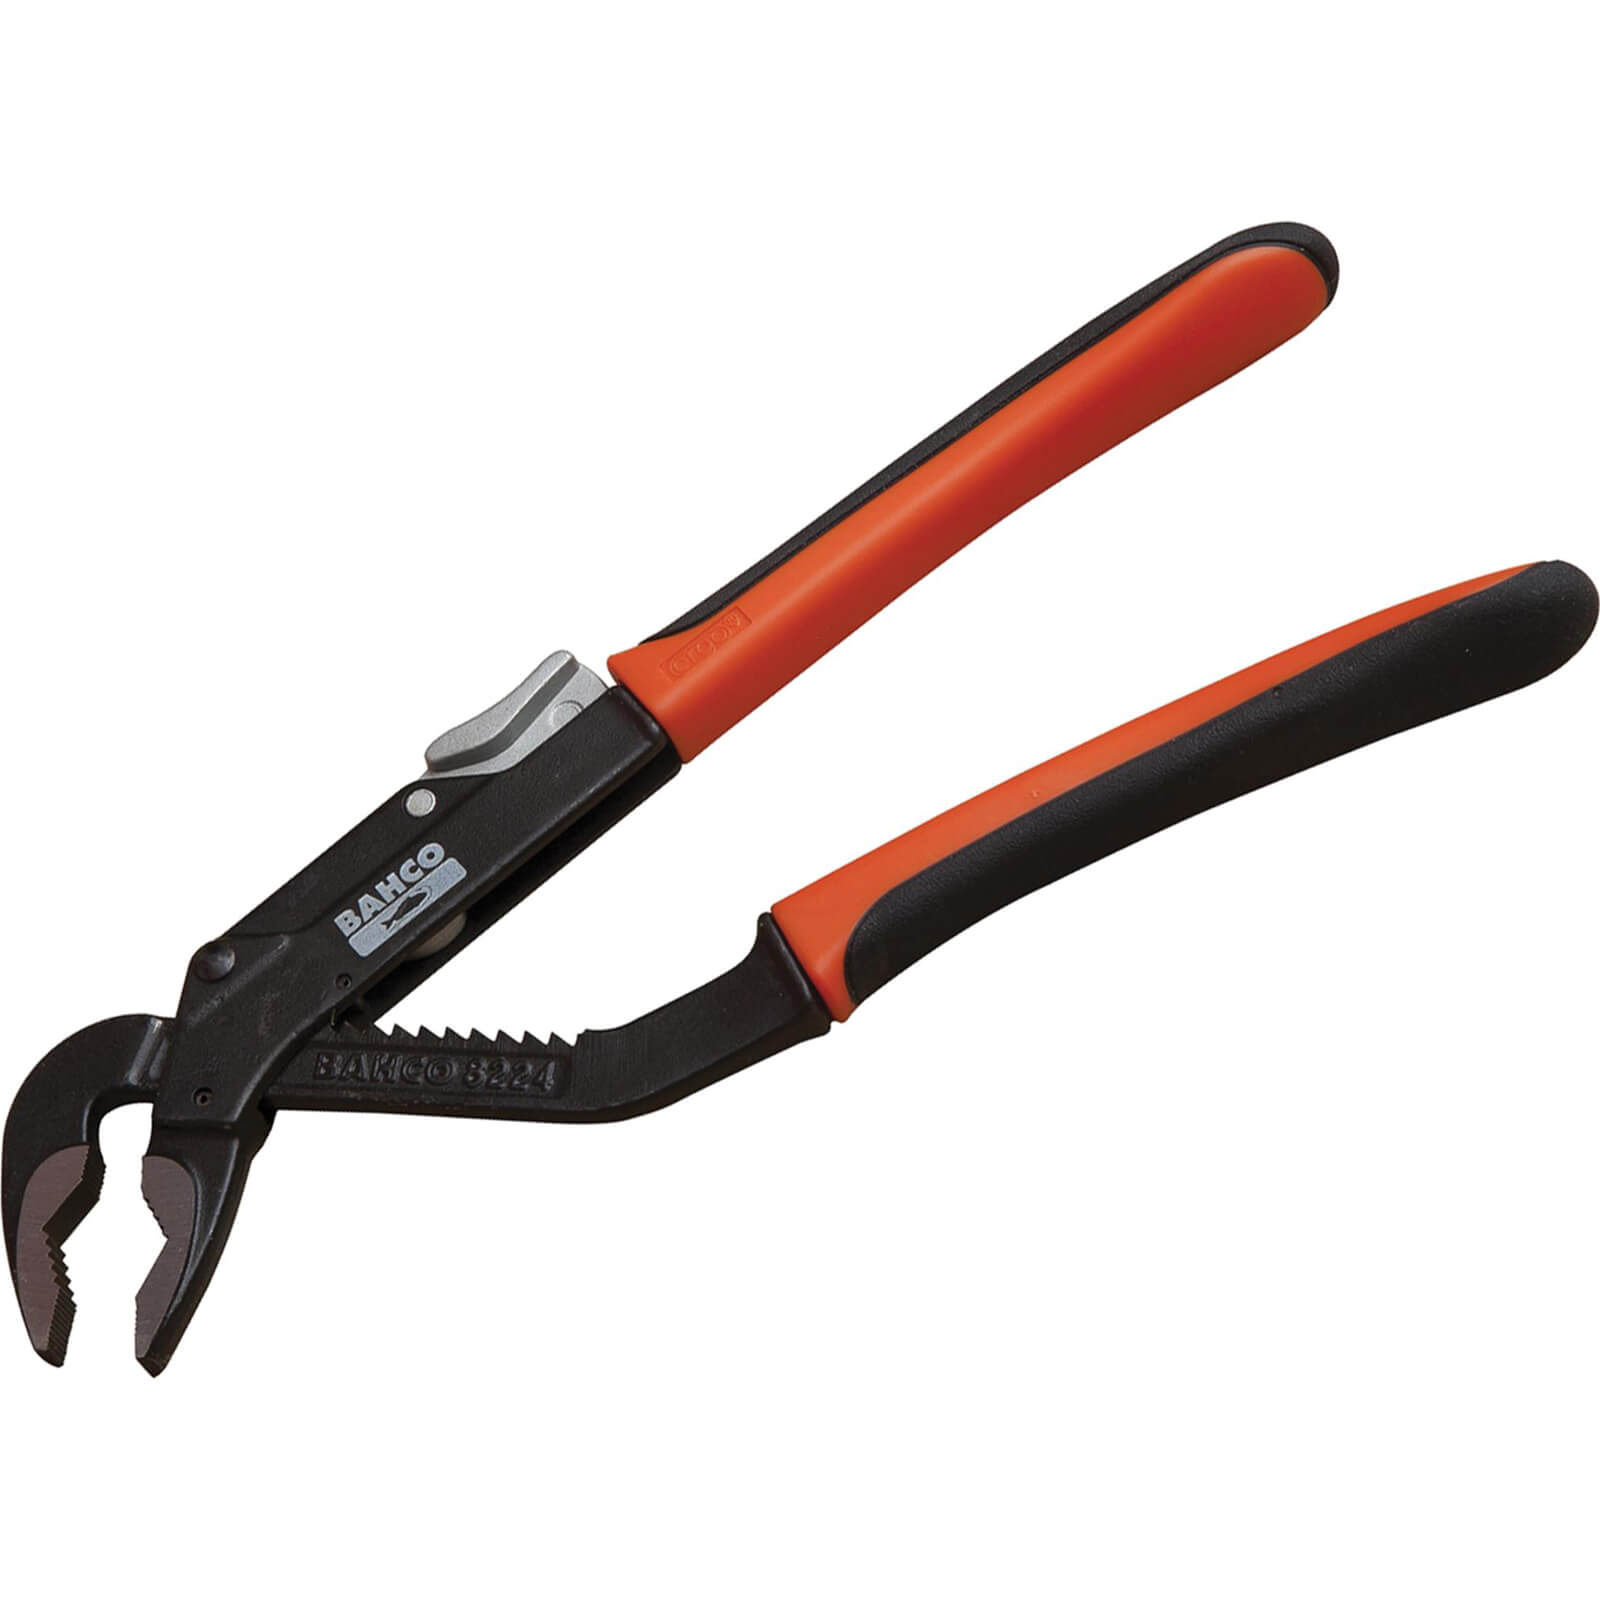 Photo of Bahco 822 Slip Joint Pliers Ergo Handle 200mm